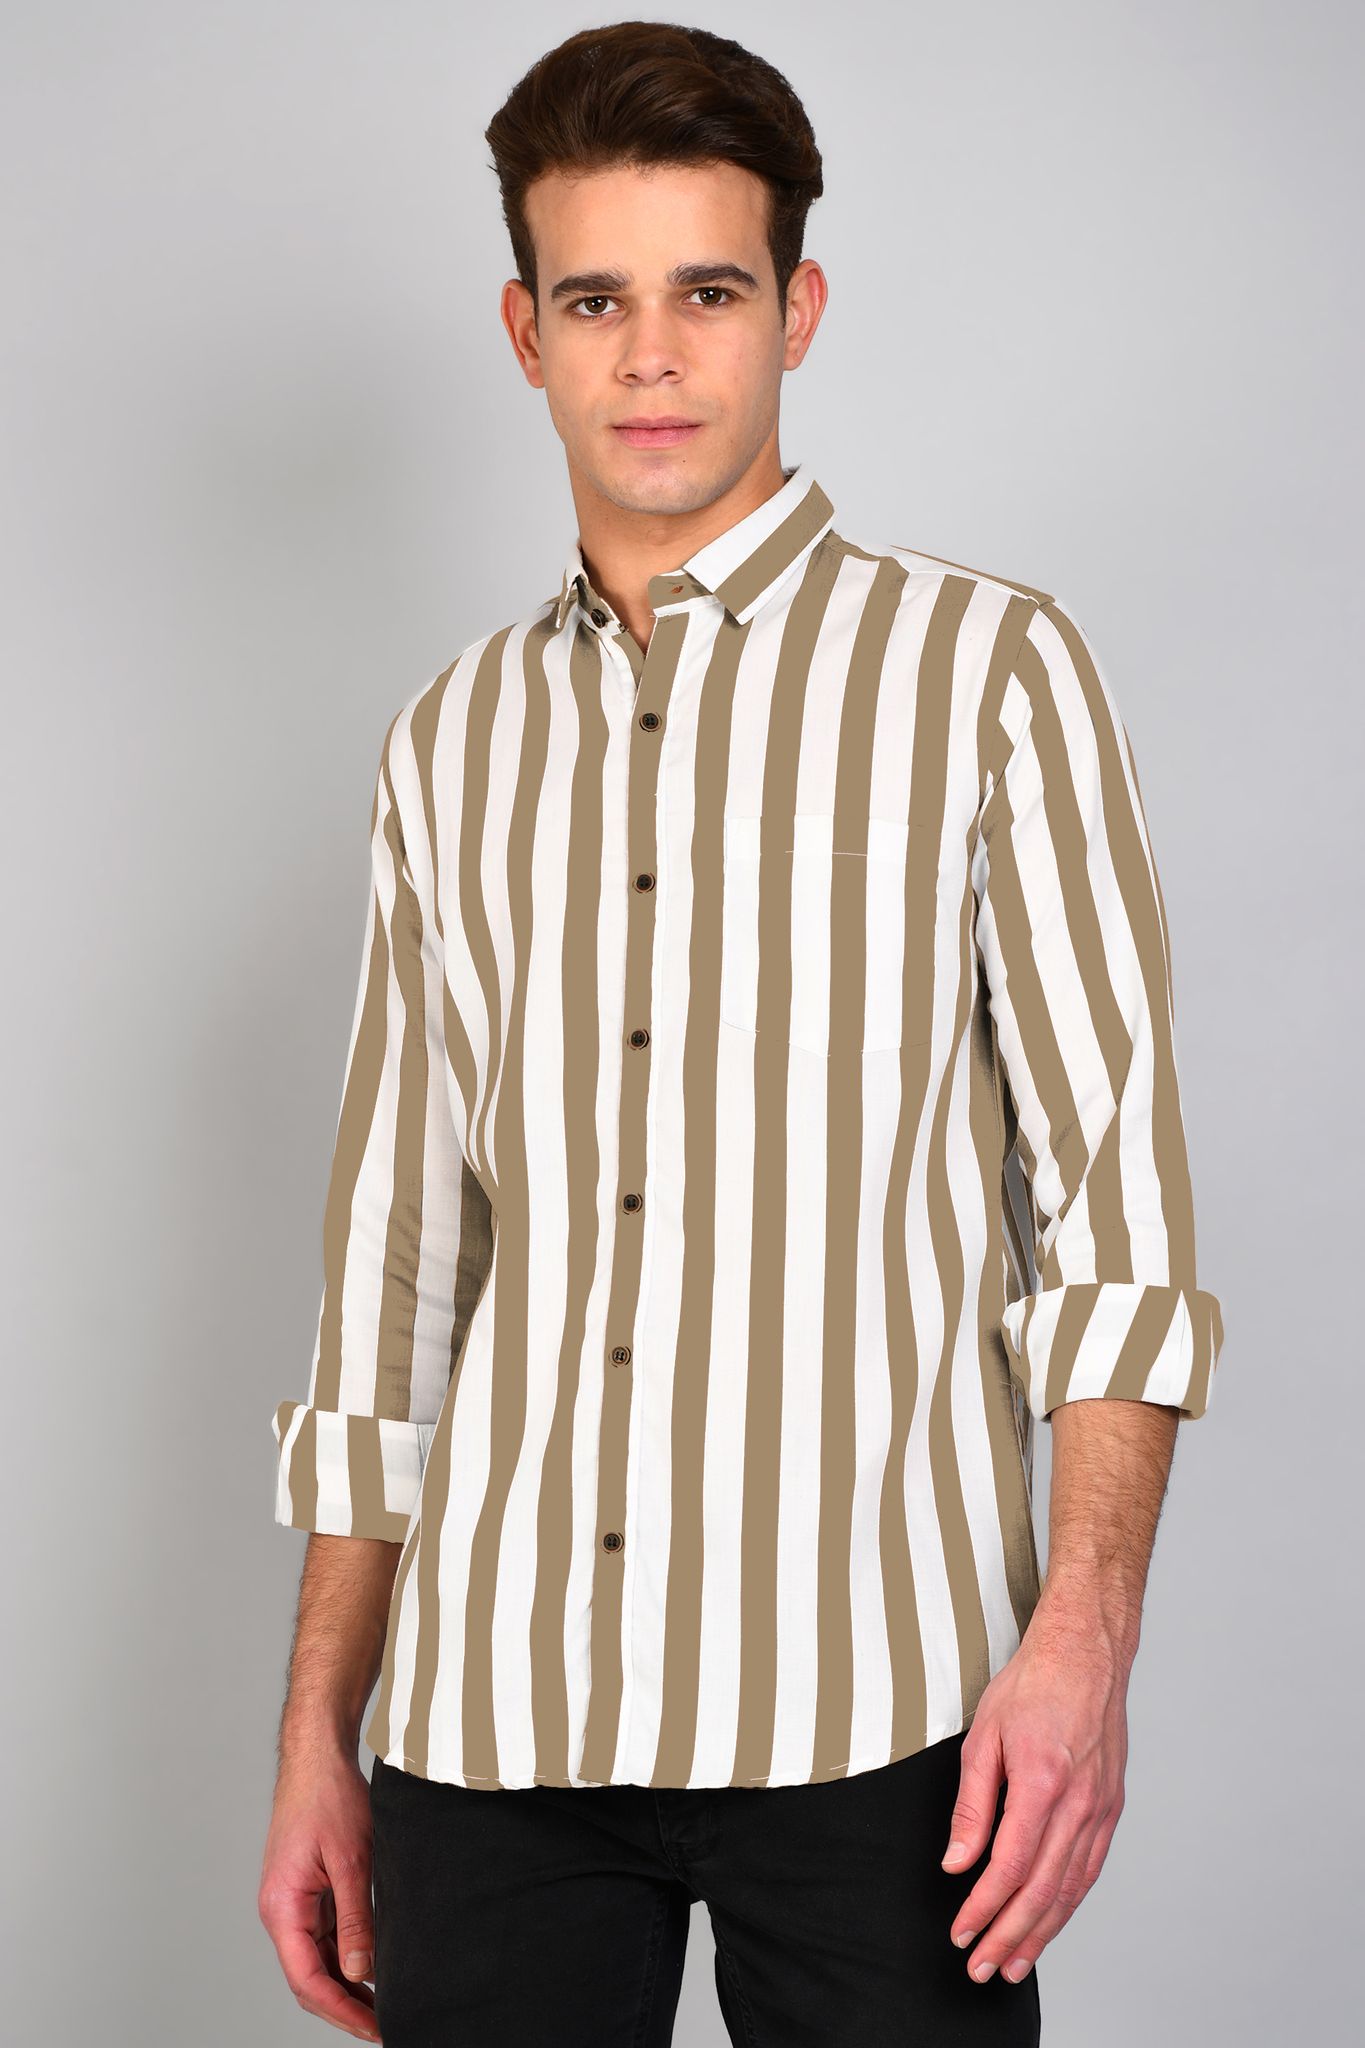 Casual Shirt for Men striped full sleeves